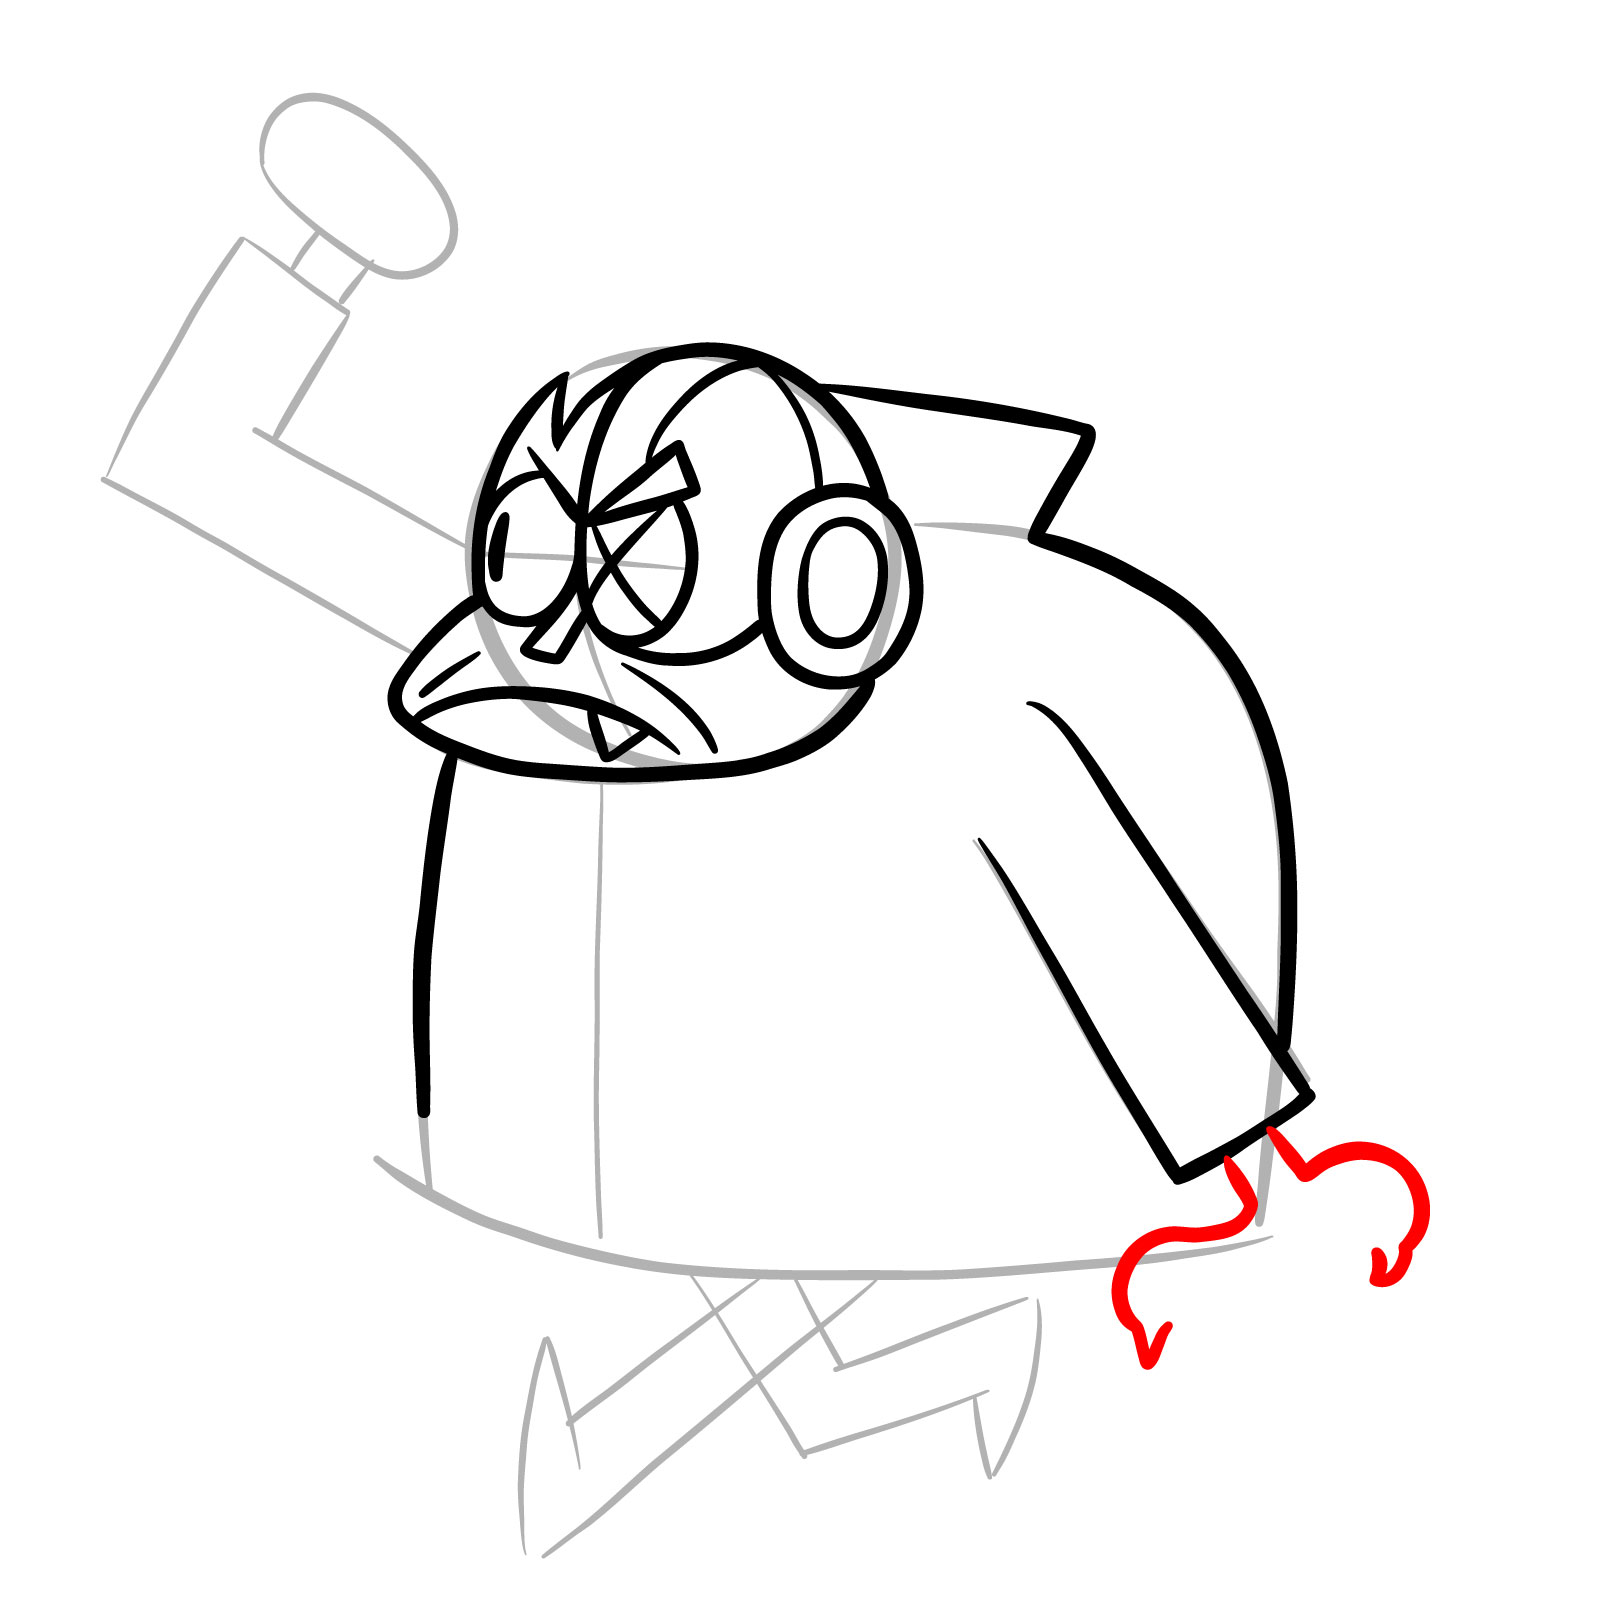 How to draw Lord Boxman from OK K.O.! - step 13